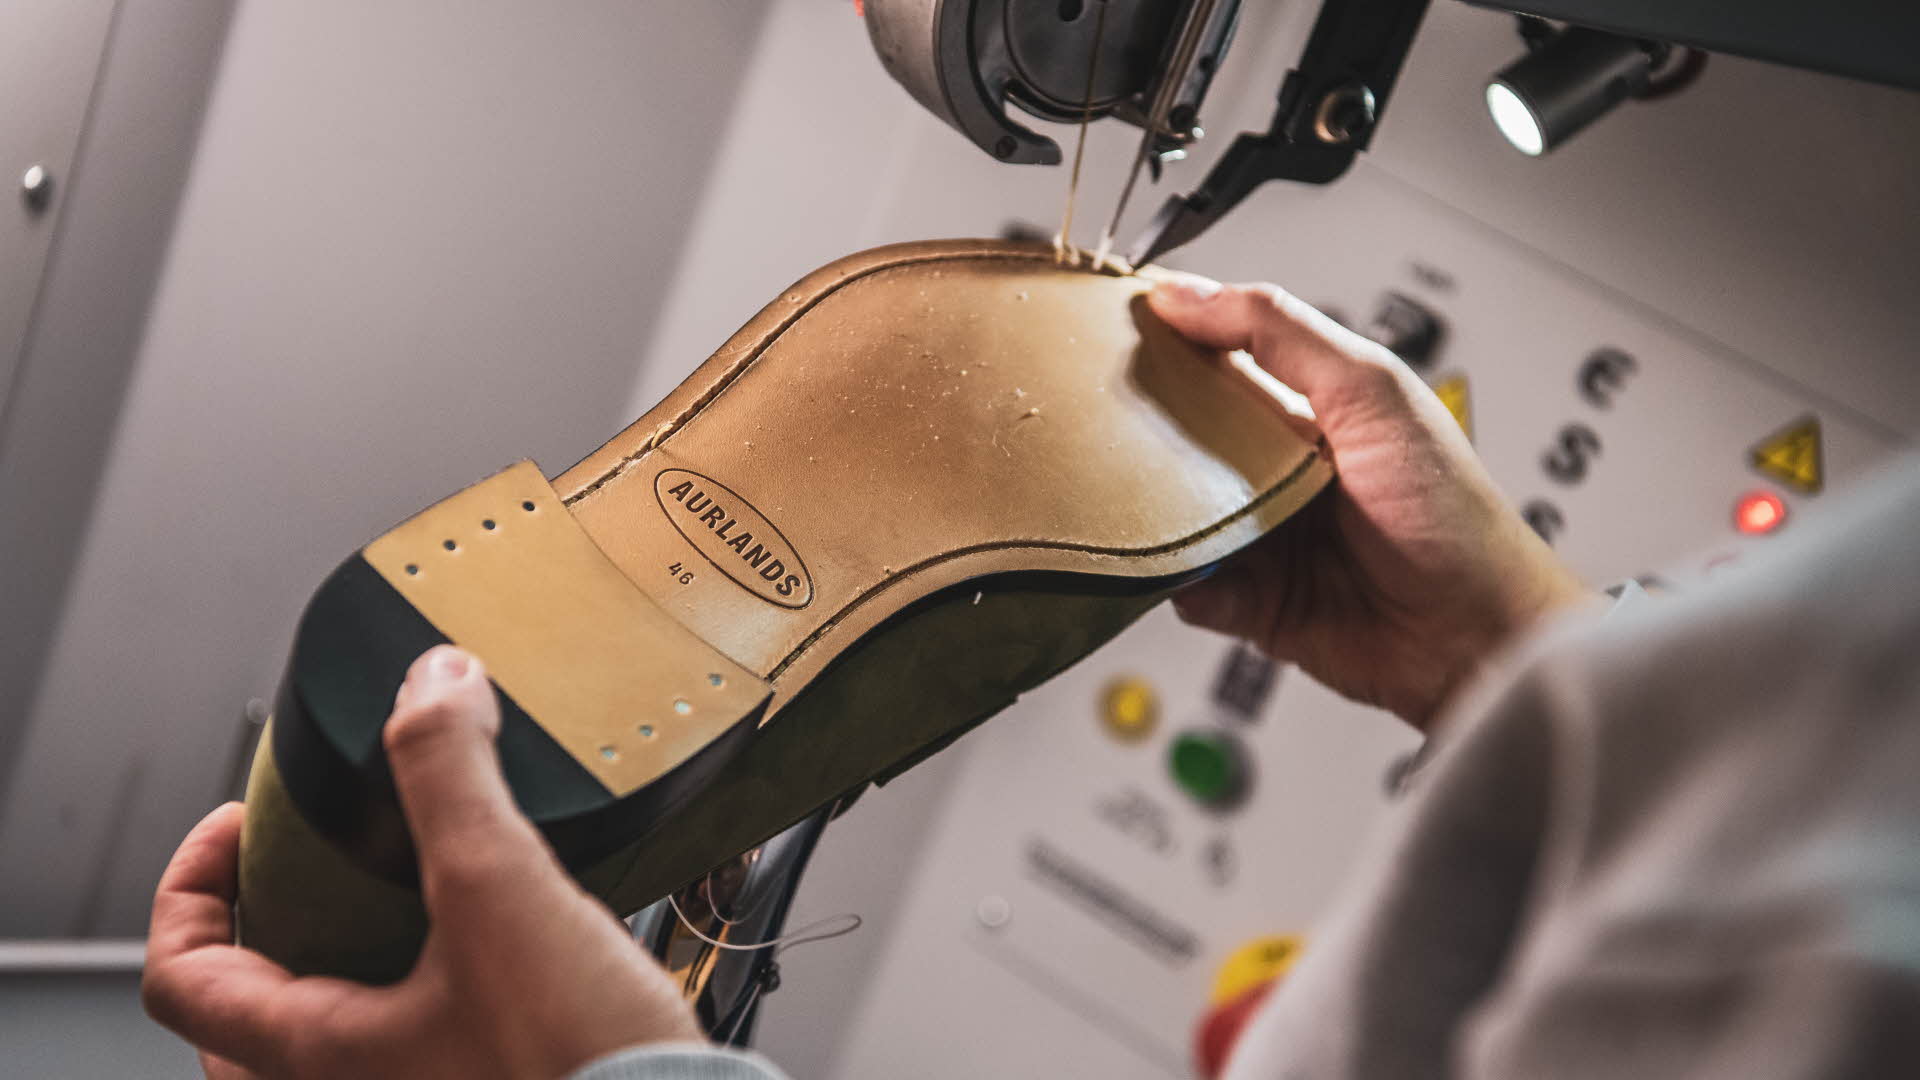 Worker is stitching underside sole of Aurland shoe. Aurlands new logo is popping in the mini spotlight attached to sewing machine.